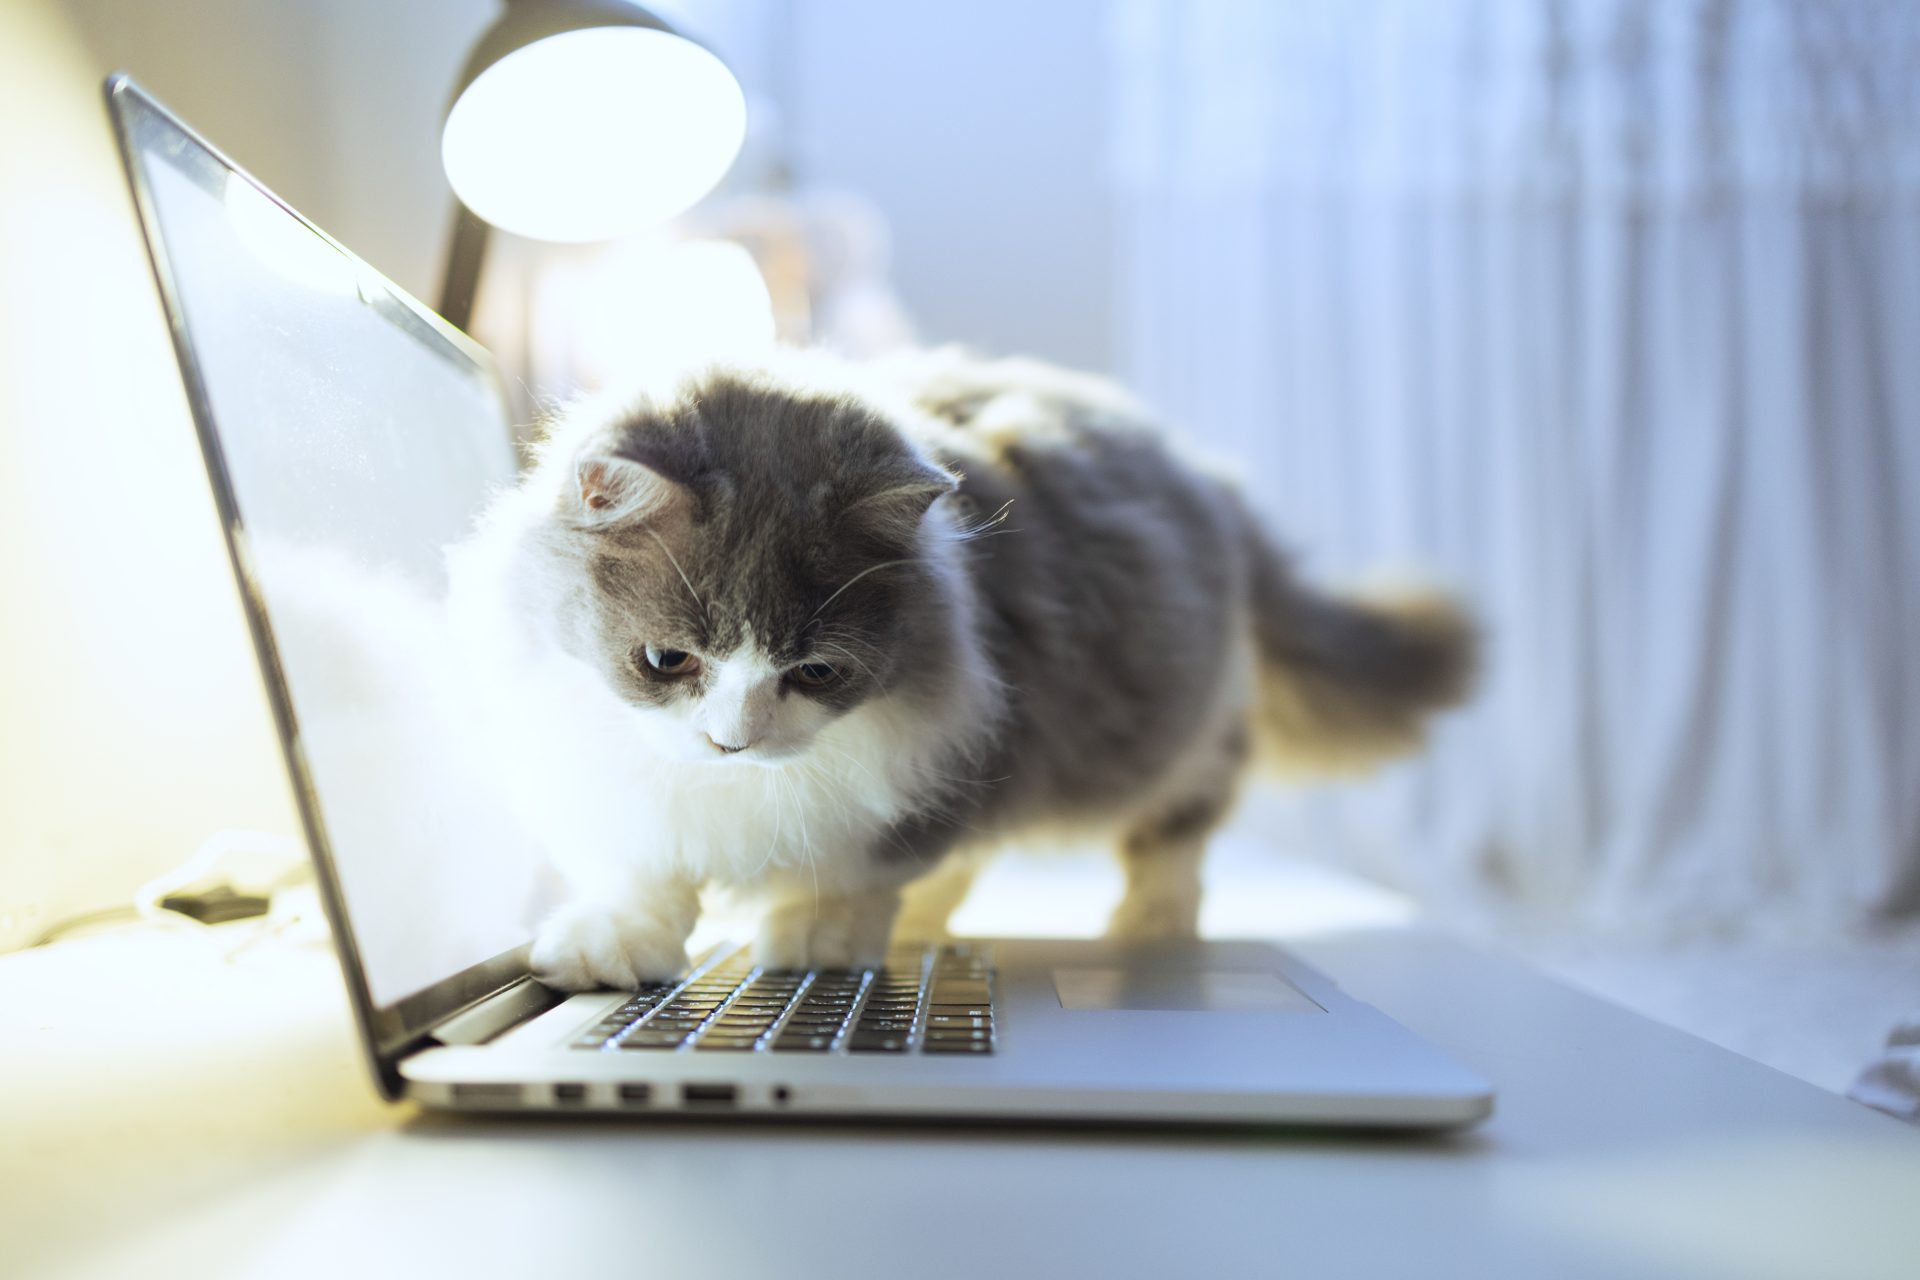 PawSence: A software to detect when a cat is walking across your computer keyboard